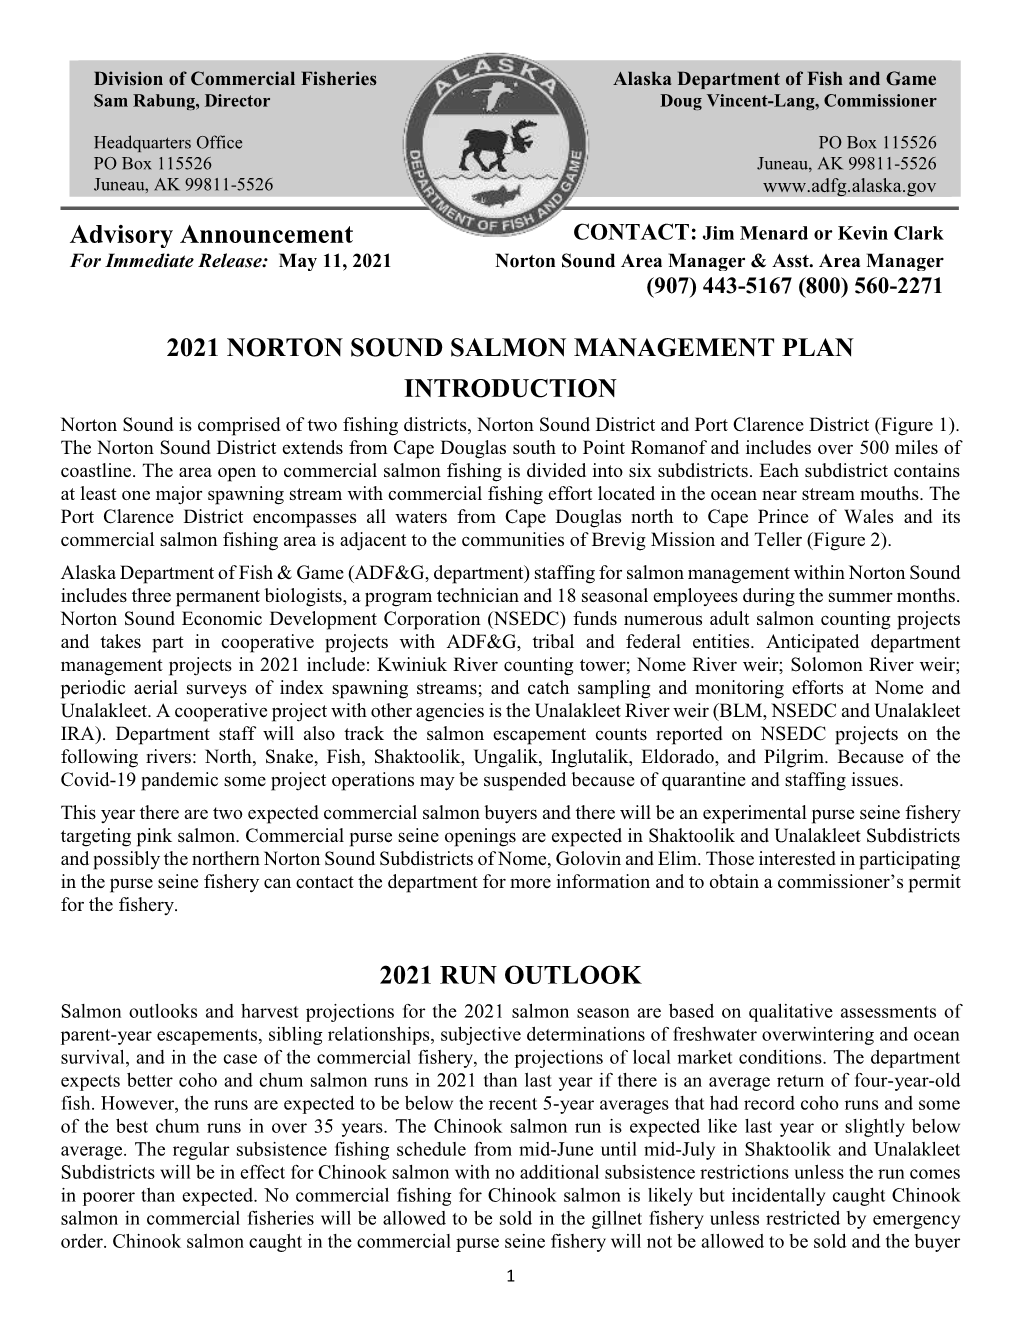 2021 NORTON SOUND SALMON MANAGEMENT PLAN INTRODUCTION Norton Sound Is Comprised of Two Fishing Districts, Norton Sound District and Port Clarence District (Figure 1)